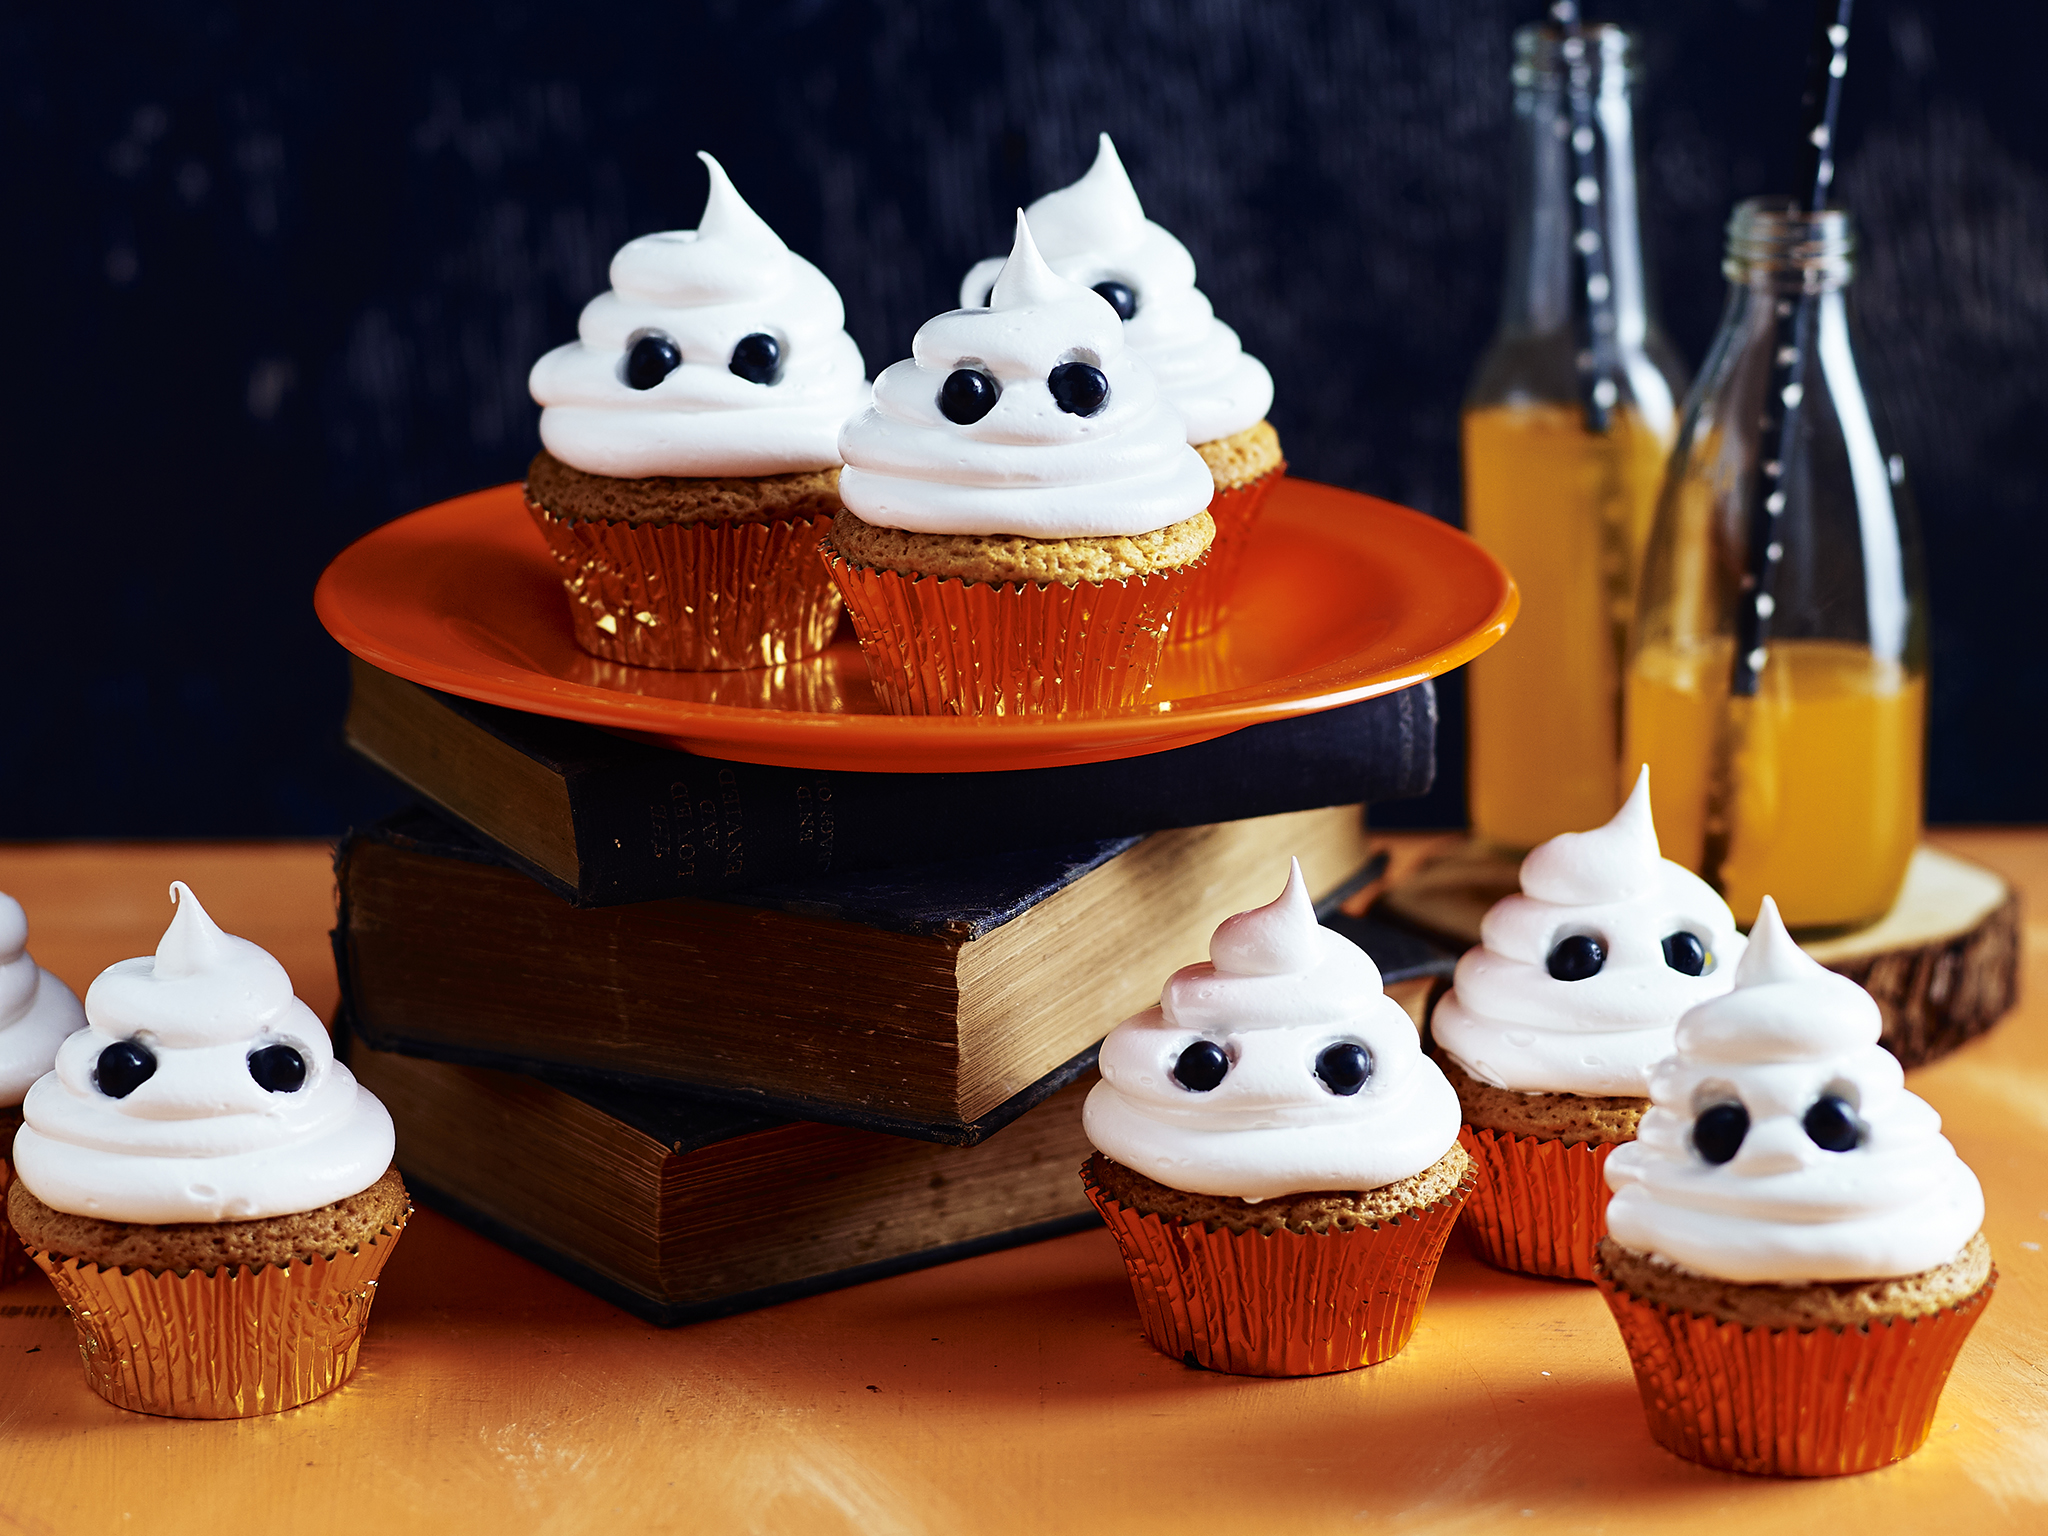 Halloween white chocolate ghost cupcakes with fluffy meringue icing